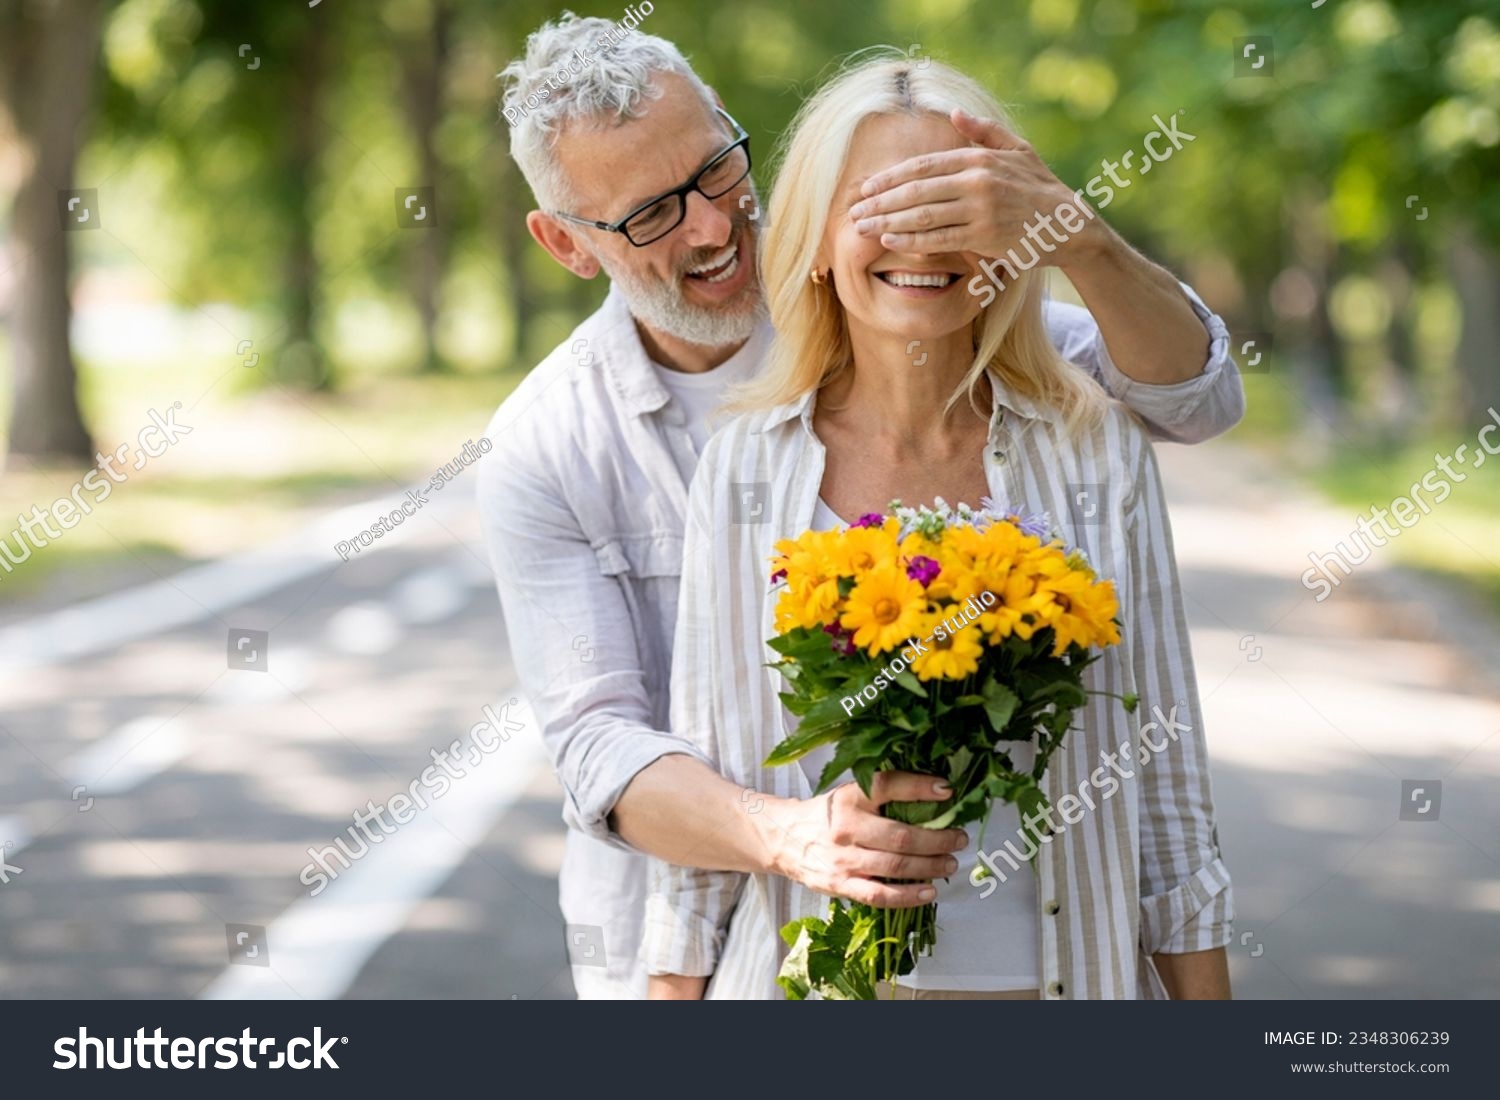 Loving Mature Husband Surprising Wife With Flowers, Covering Her Eyes And Giving Bouquet, Caring Man Greeting Spouse With Anniversary Or Making Romantic Surprise During Outdoor Date In Park #2348306239